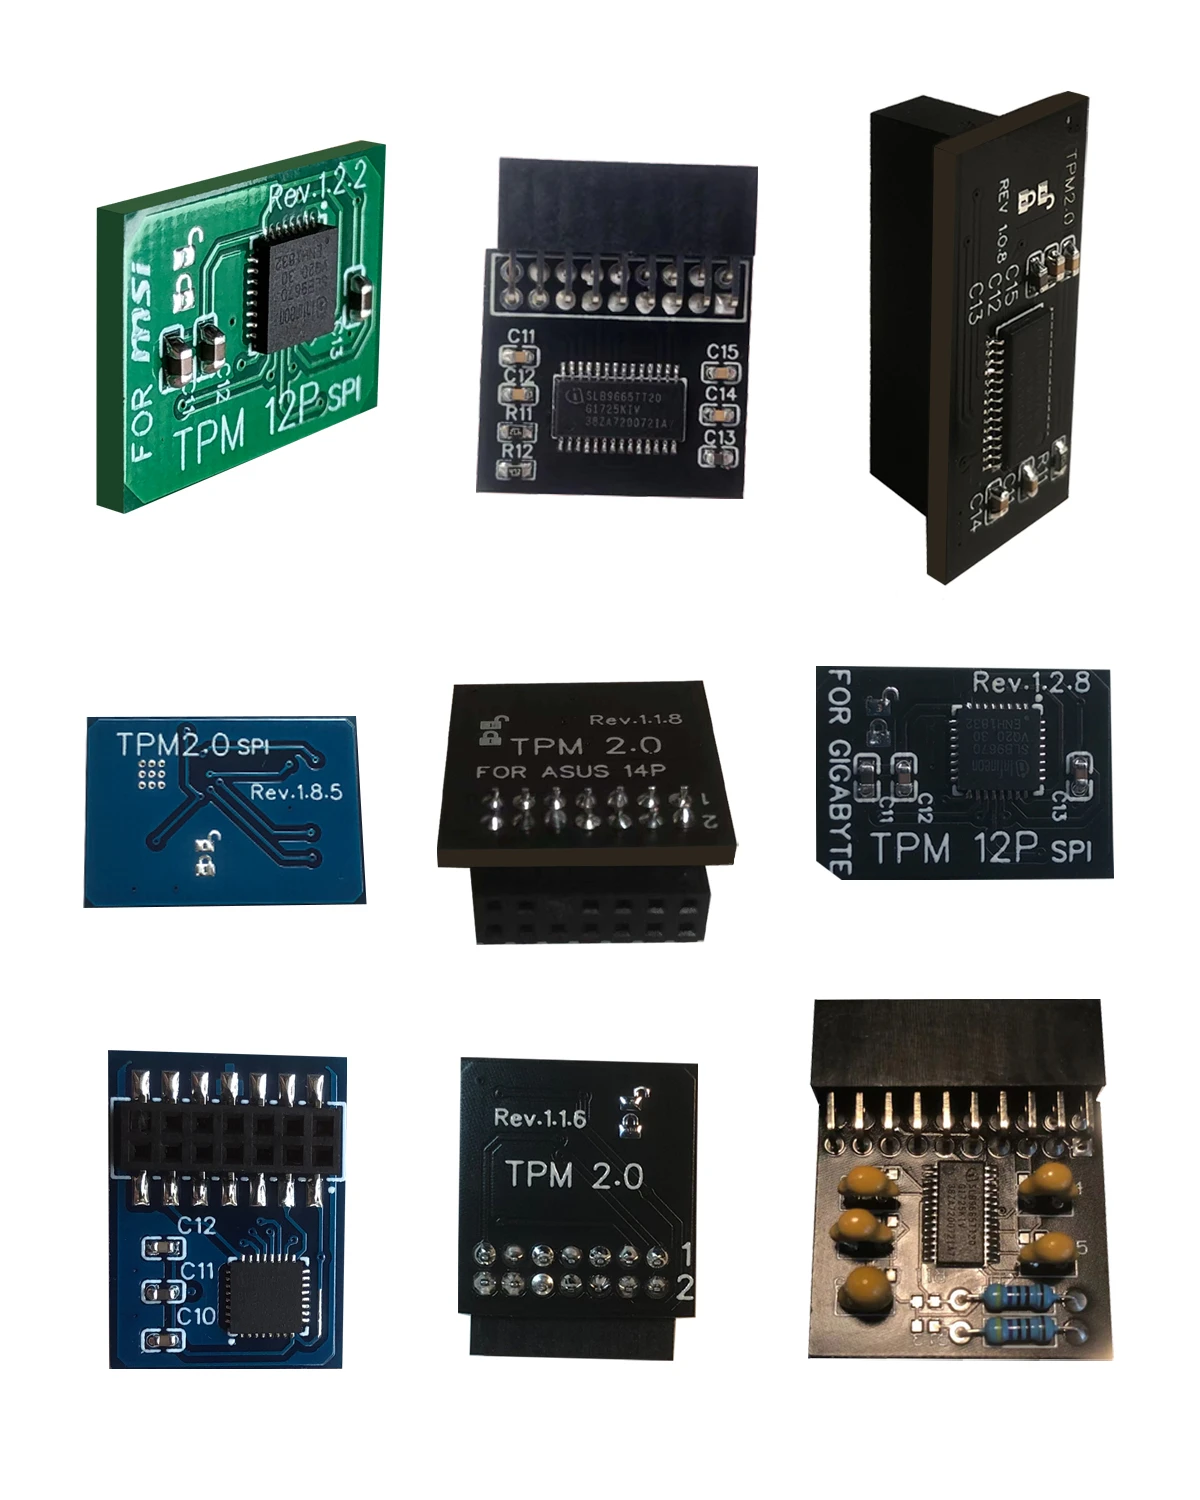 TPM 2.0 Encryption Security Module Remote Card Supports Version 2.0 12 14 18 20-1pin Pin Support Multi-brand Motherboard